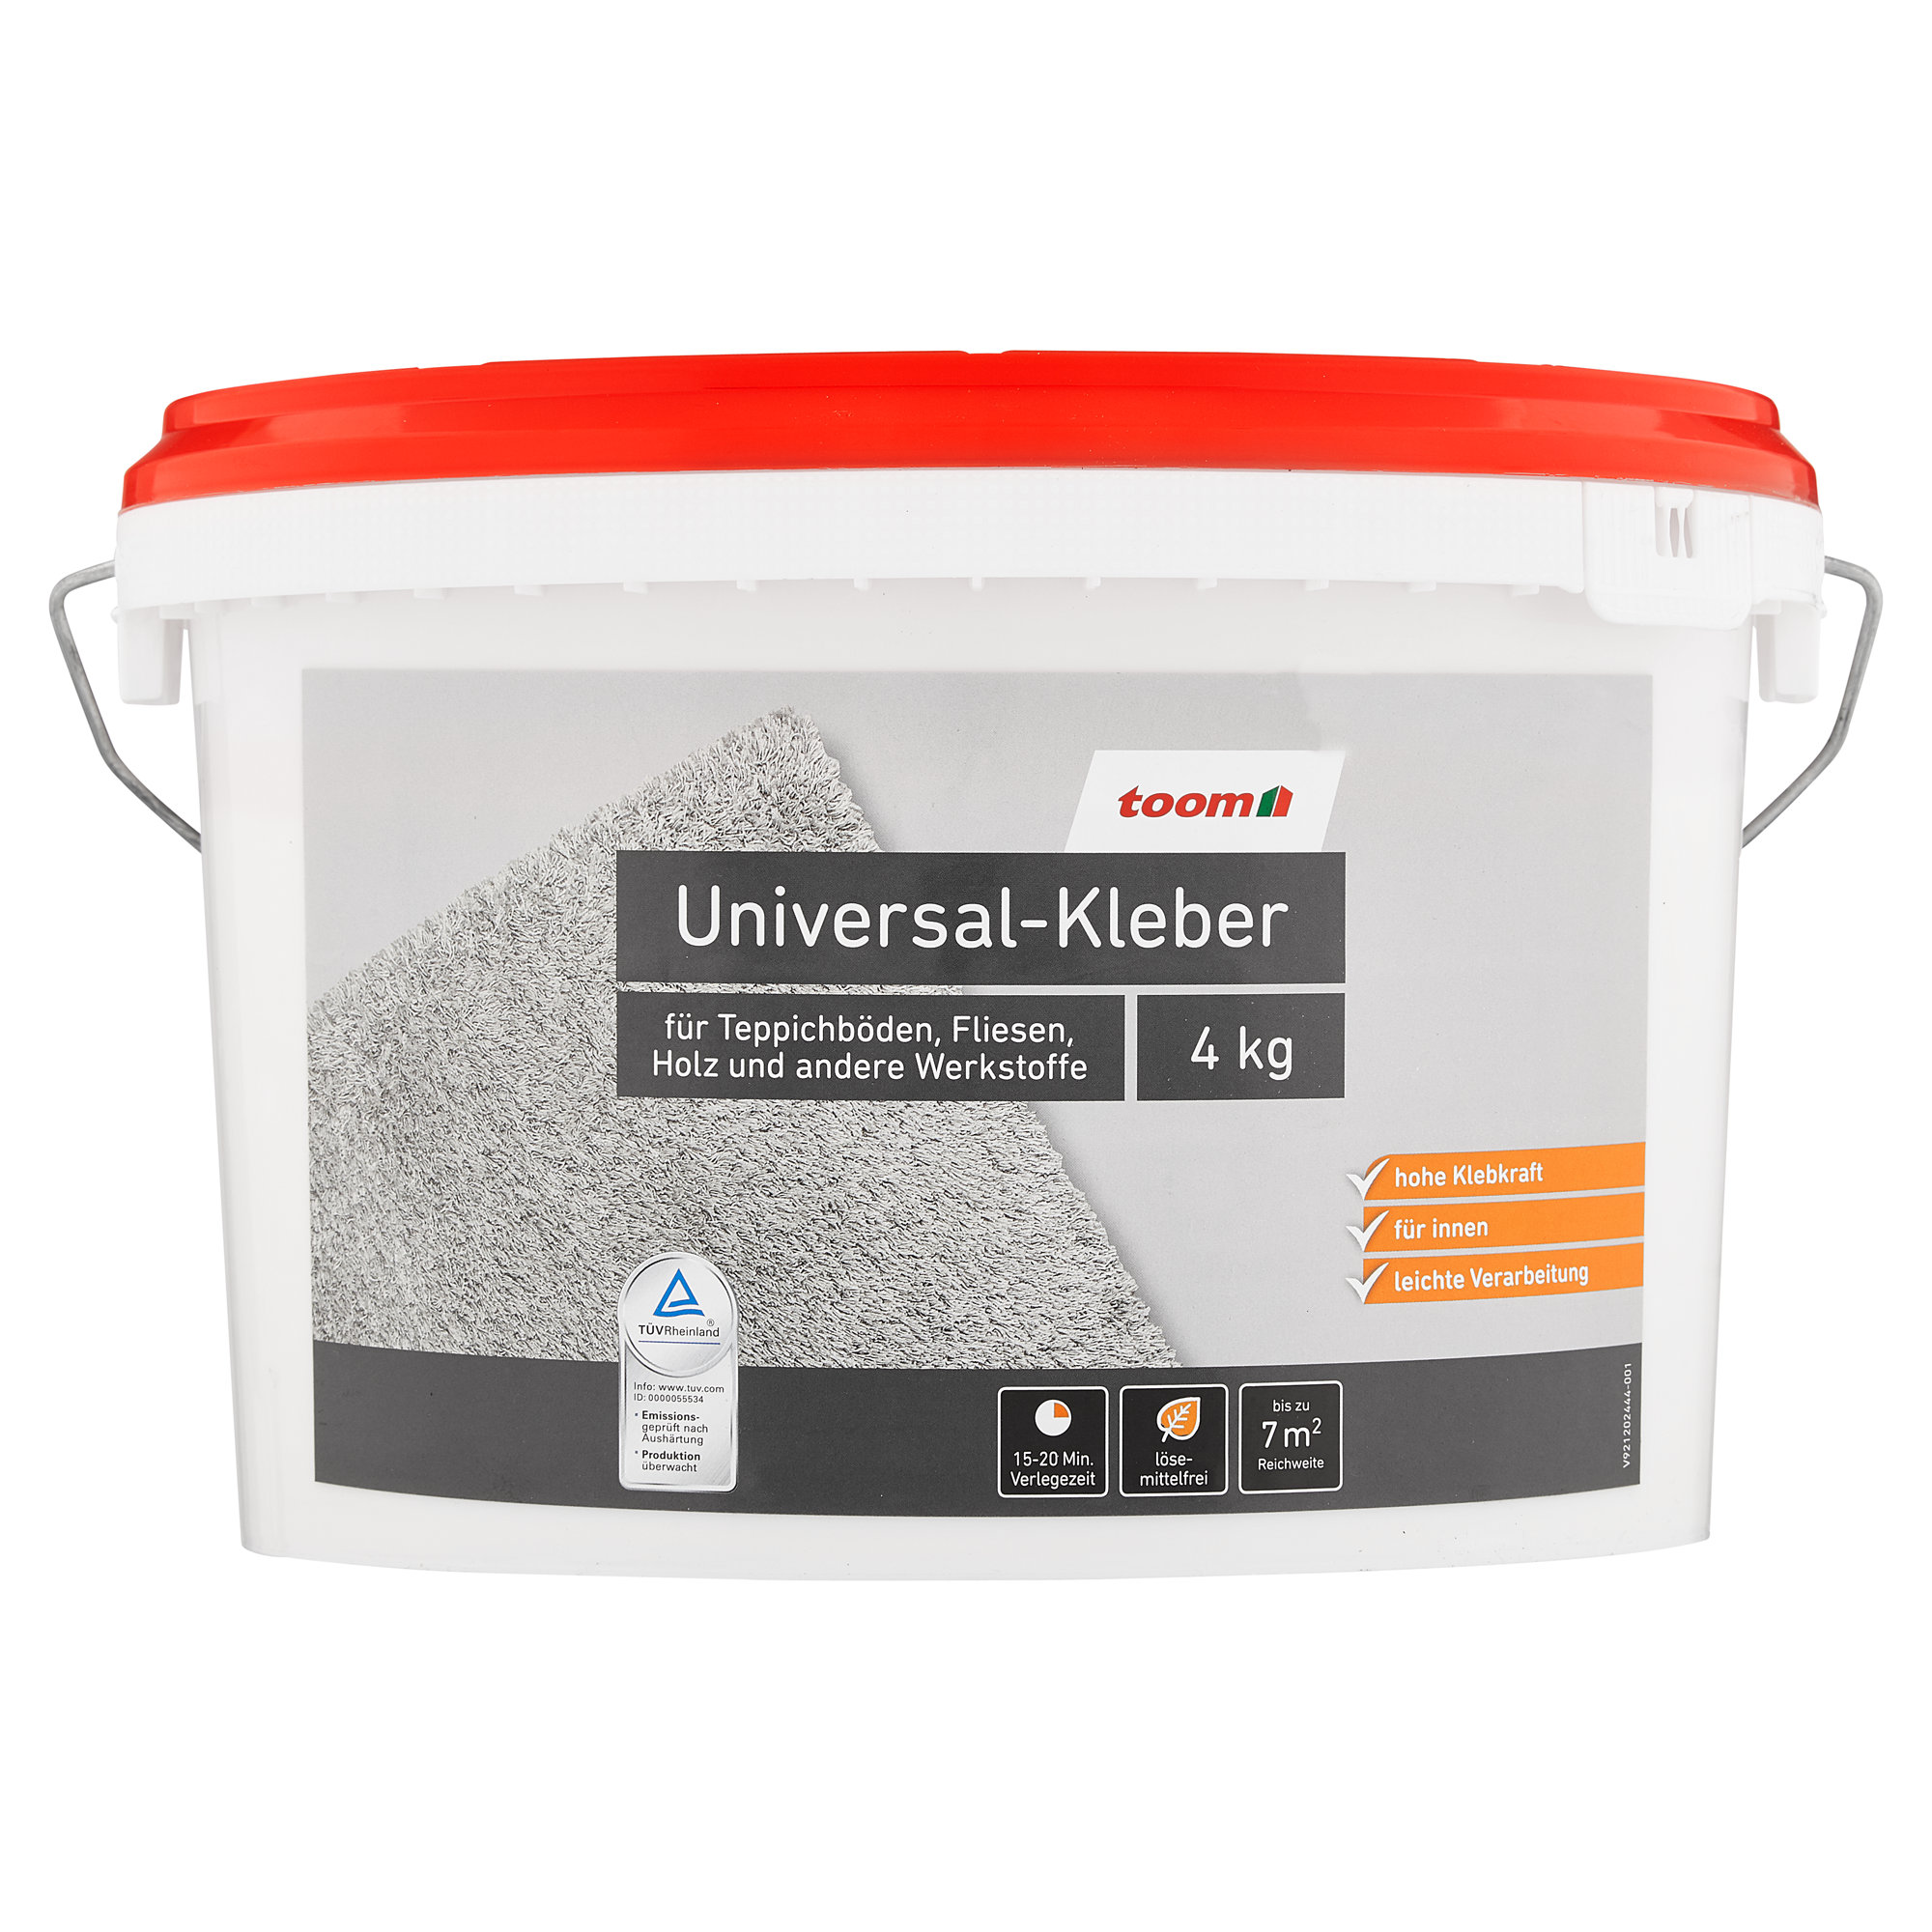 Universal-Kleber 4 kg + product picture